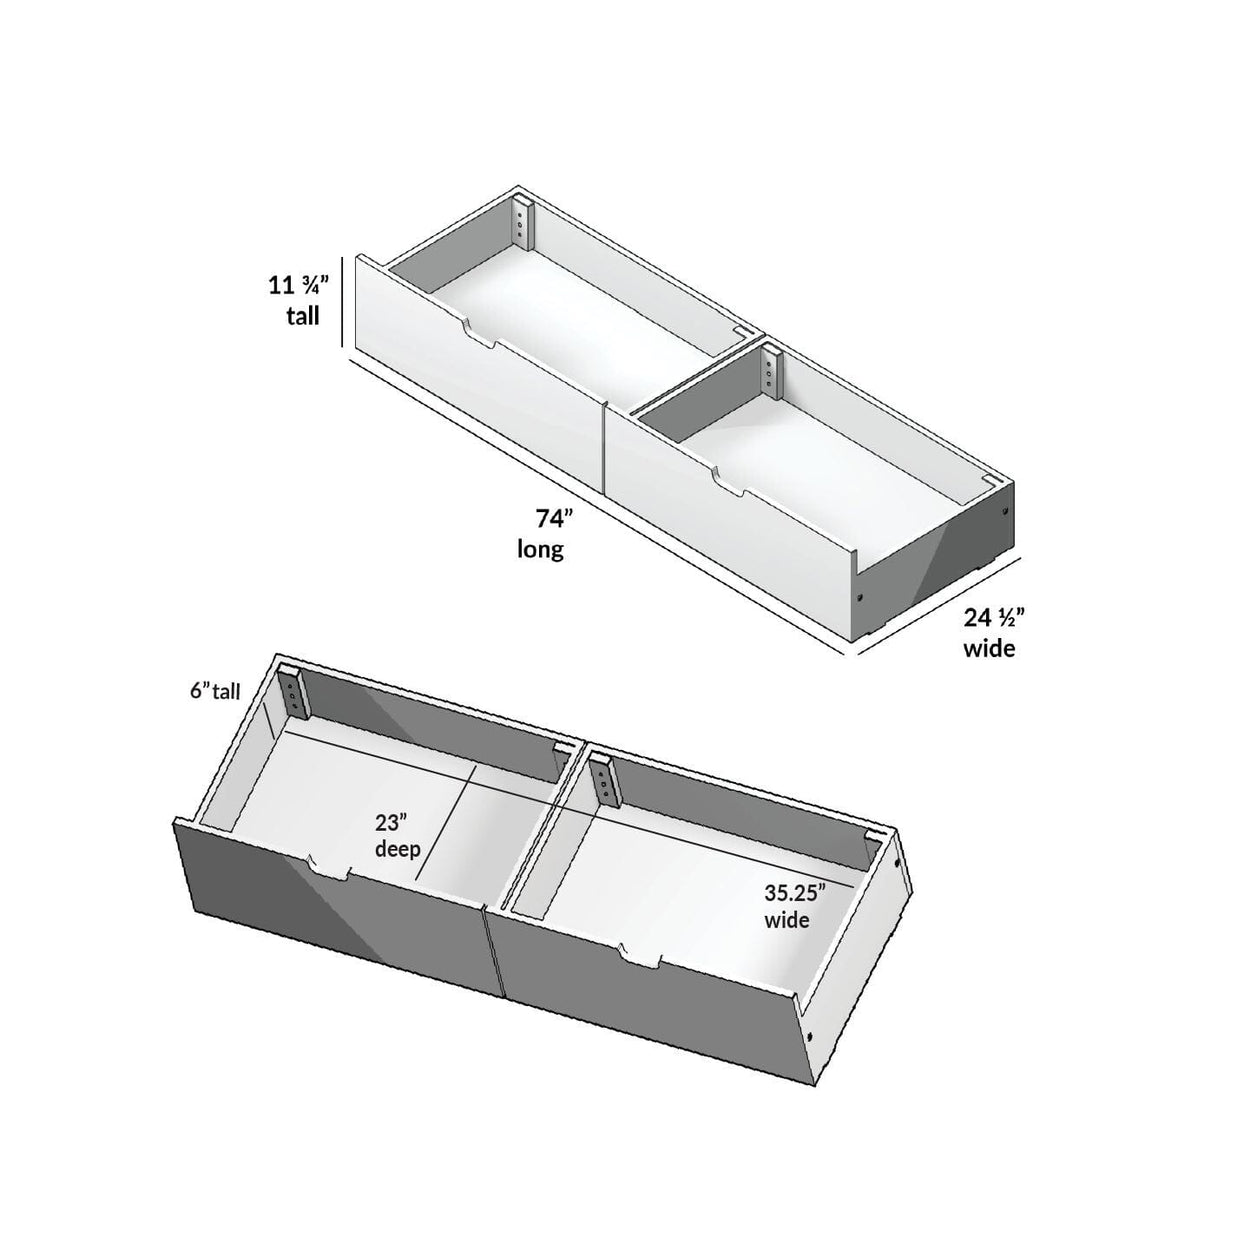 175262-151 : Component 2 Underbed Storage Drawers w/Rubber Castors, Clay